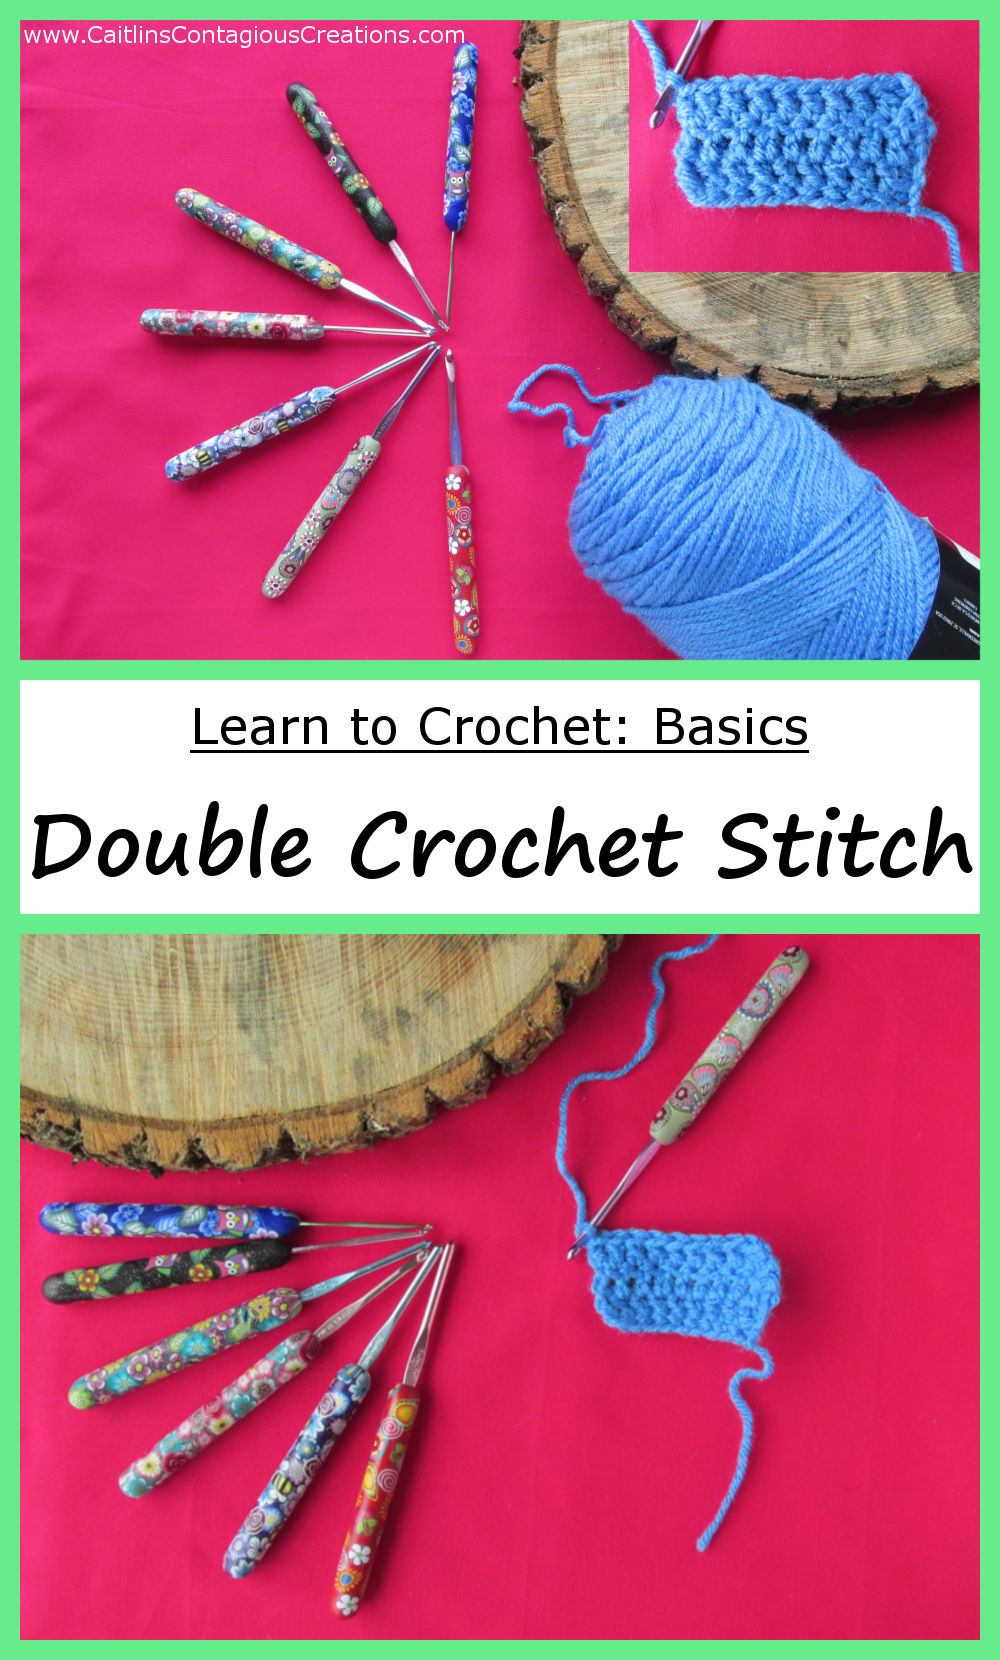 Learn to Crochet a basic stitch, the Double Crochet Stitch. This tutorial from Caitlin's Contagious Creations is a perfect beginner guide with lots of pictures. This free crochet tutorial is simple to follow and easy for any skill level.